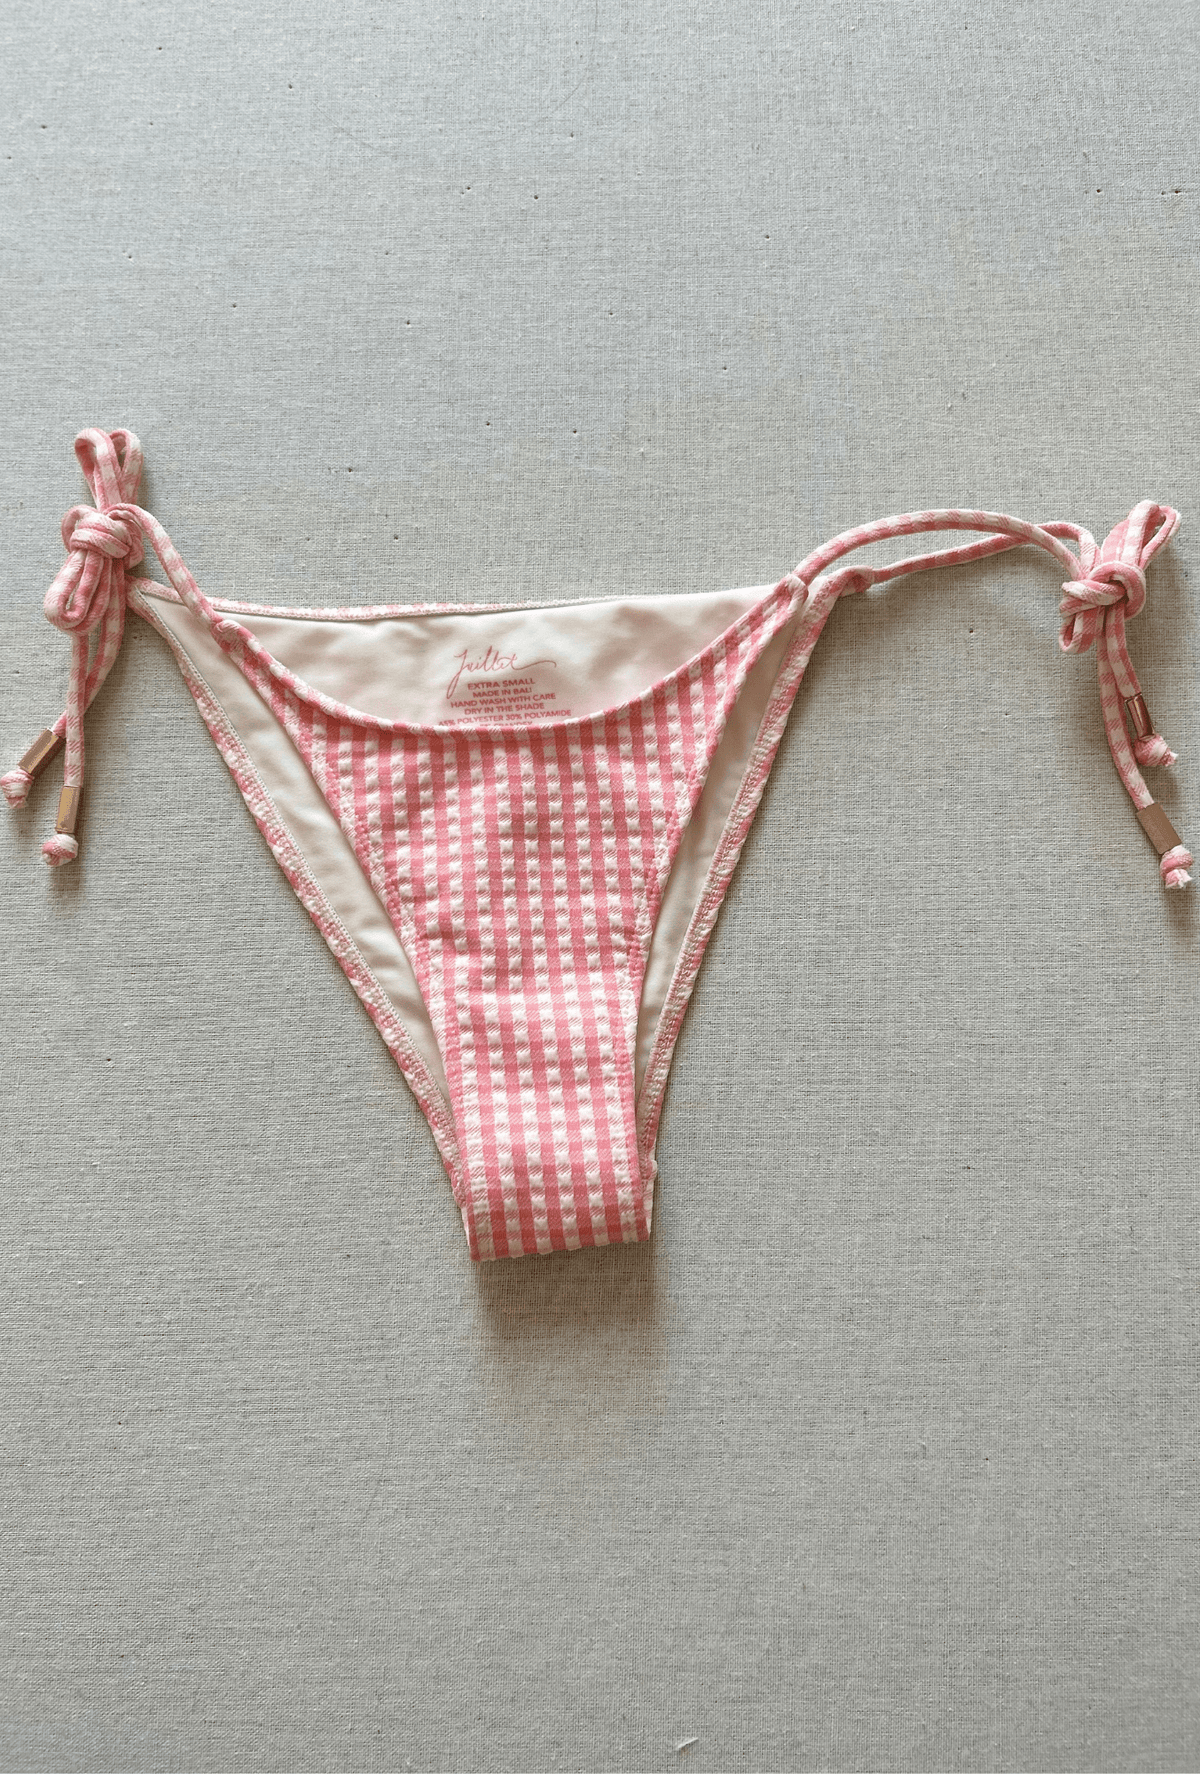 rose bottom in pink gingham - size xs